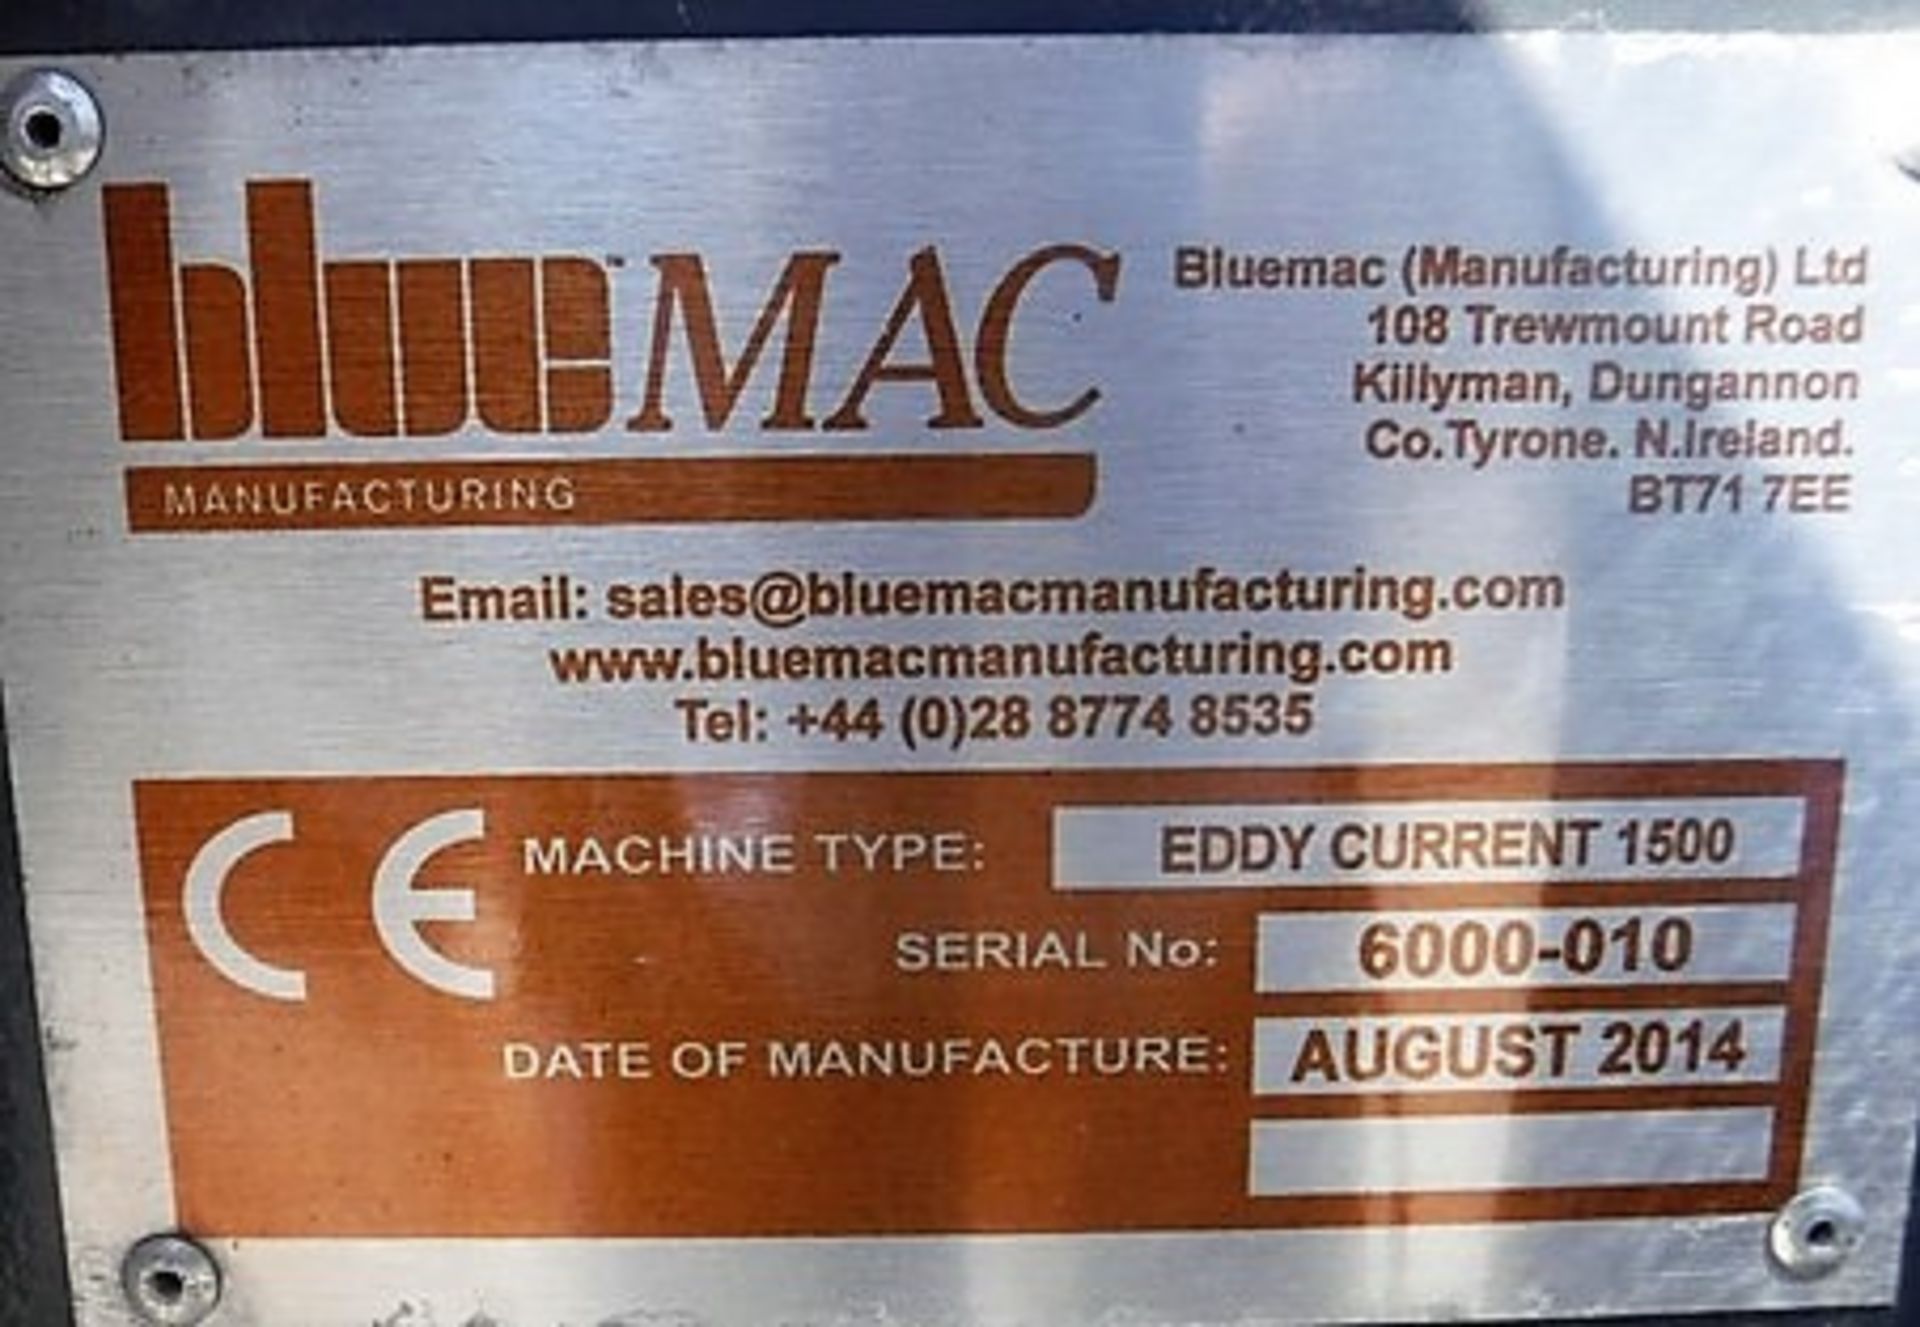 2014 BLUE MAC MANUFACTURING LTD Eddy Current Separator (ECS) s/n 6000-010 only used for woodchip wor - Image 9 of 27